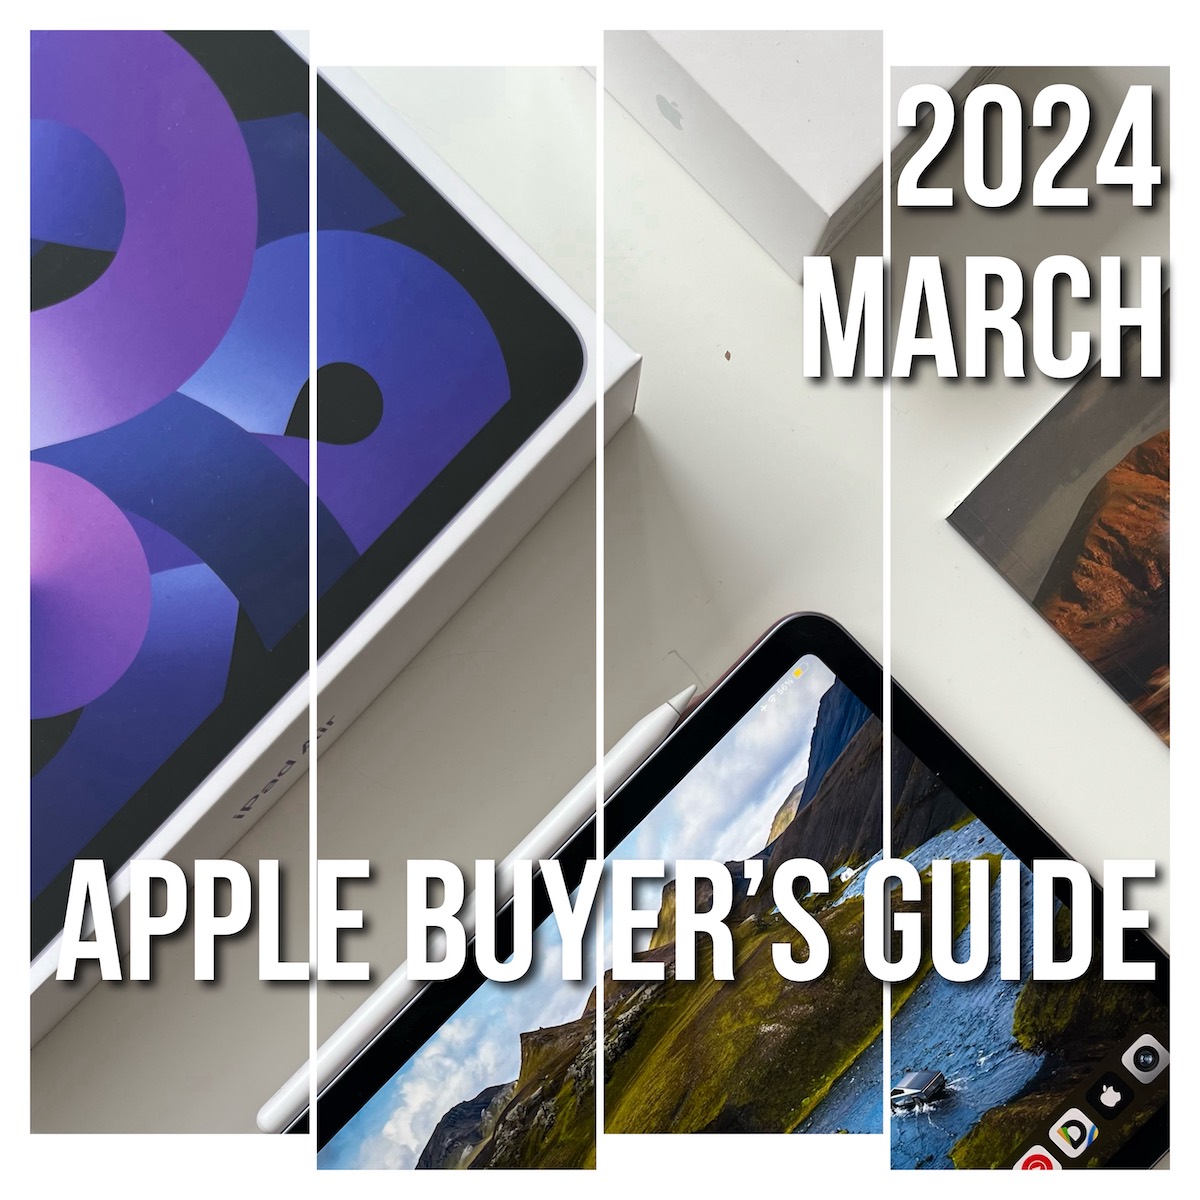 Apple_Buyers_Guide_2024_March